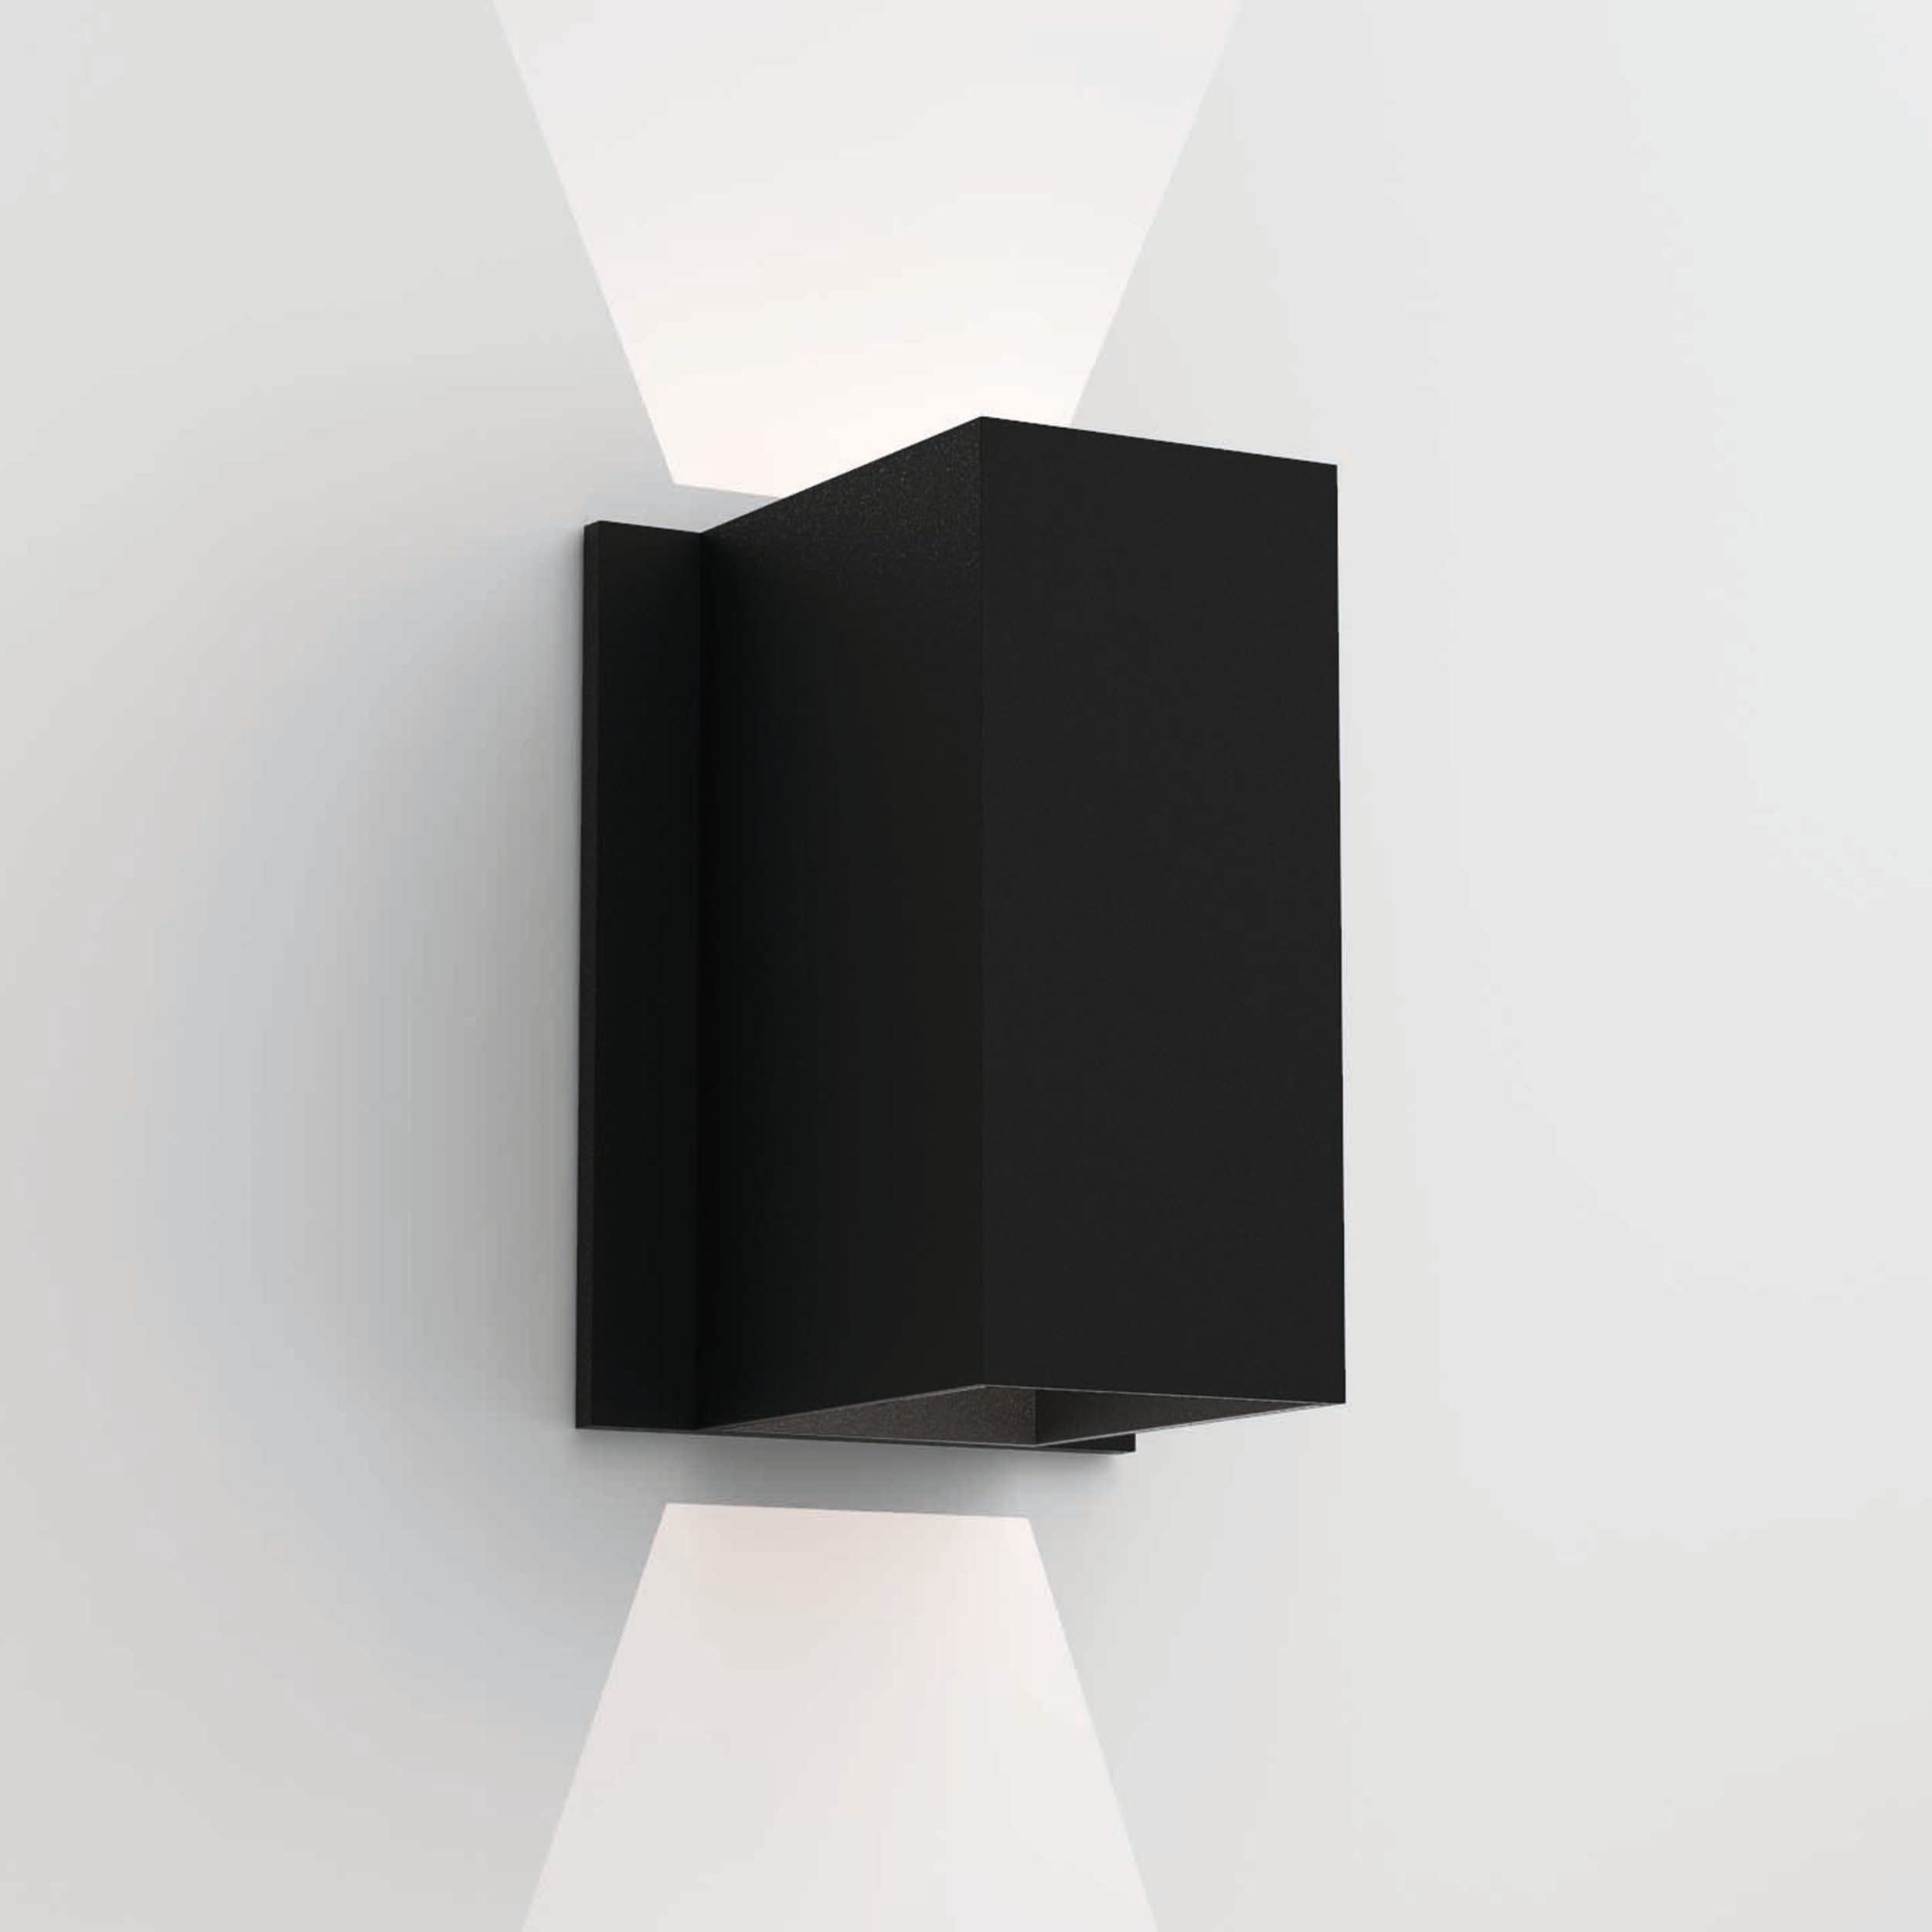 Astro Lighting Oslo Wall Light Fixtures Astro Lighting 4.17x4.33x6.3 Textured Black Yes (Integral), High Power LED